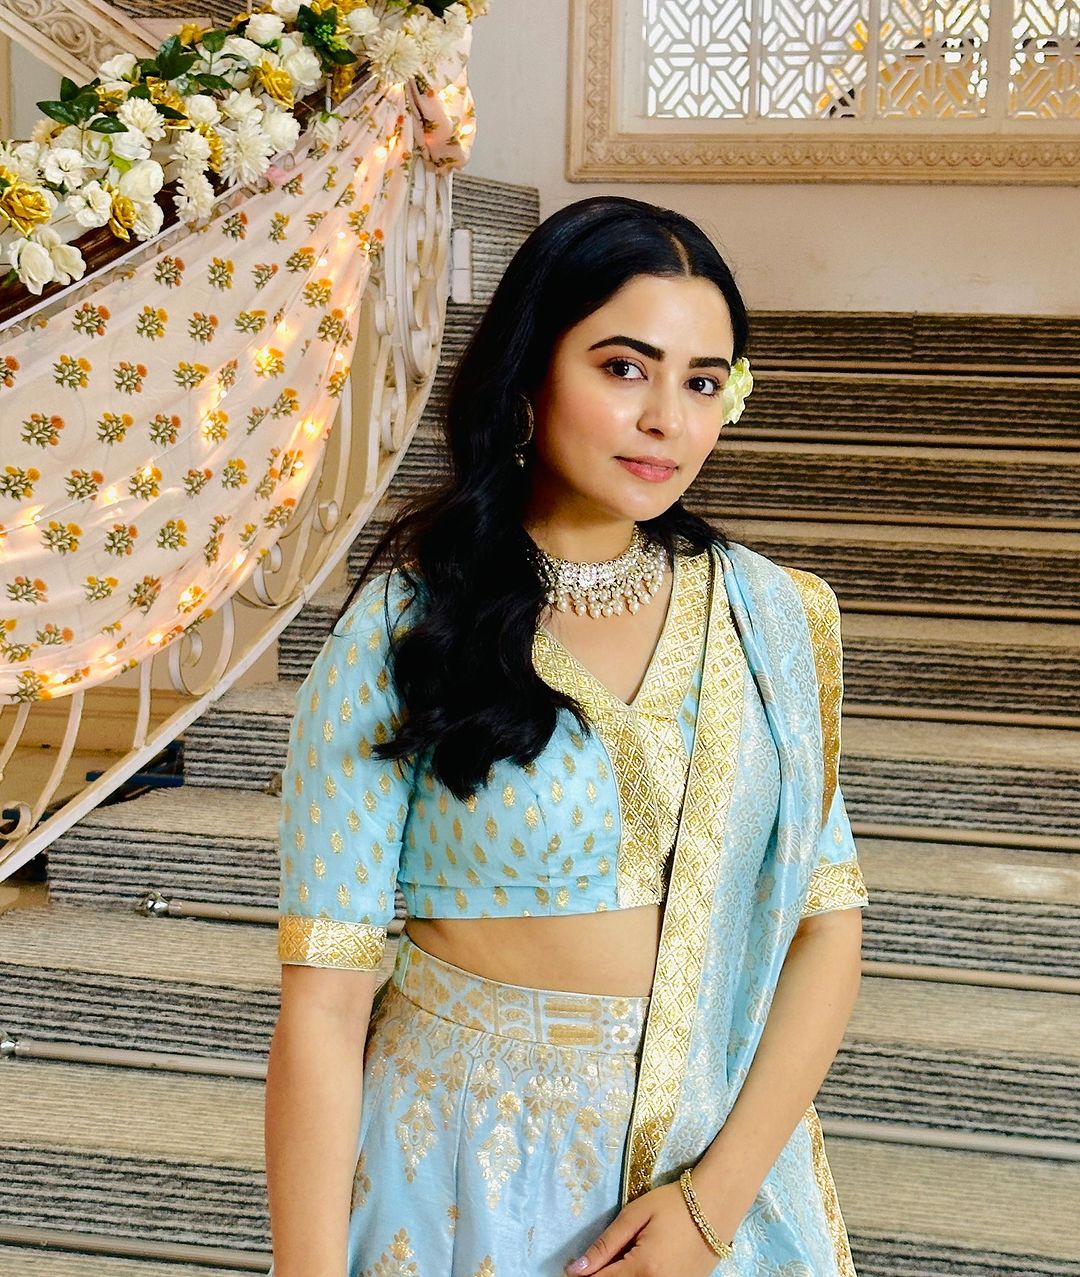 Teri Meri Doriyaann Actress Prachi Hada Opens Up About Quitting The Show. Read To Know The Reason Behind It!